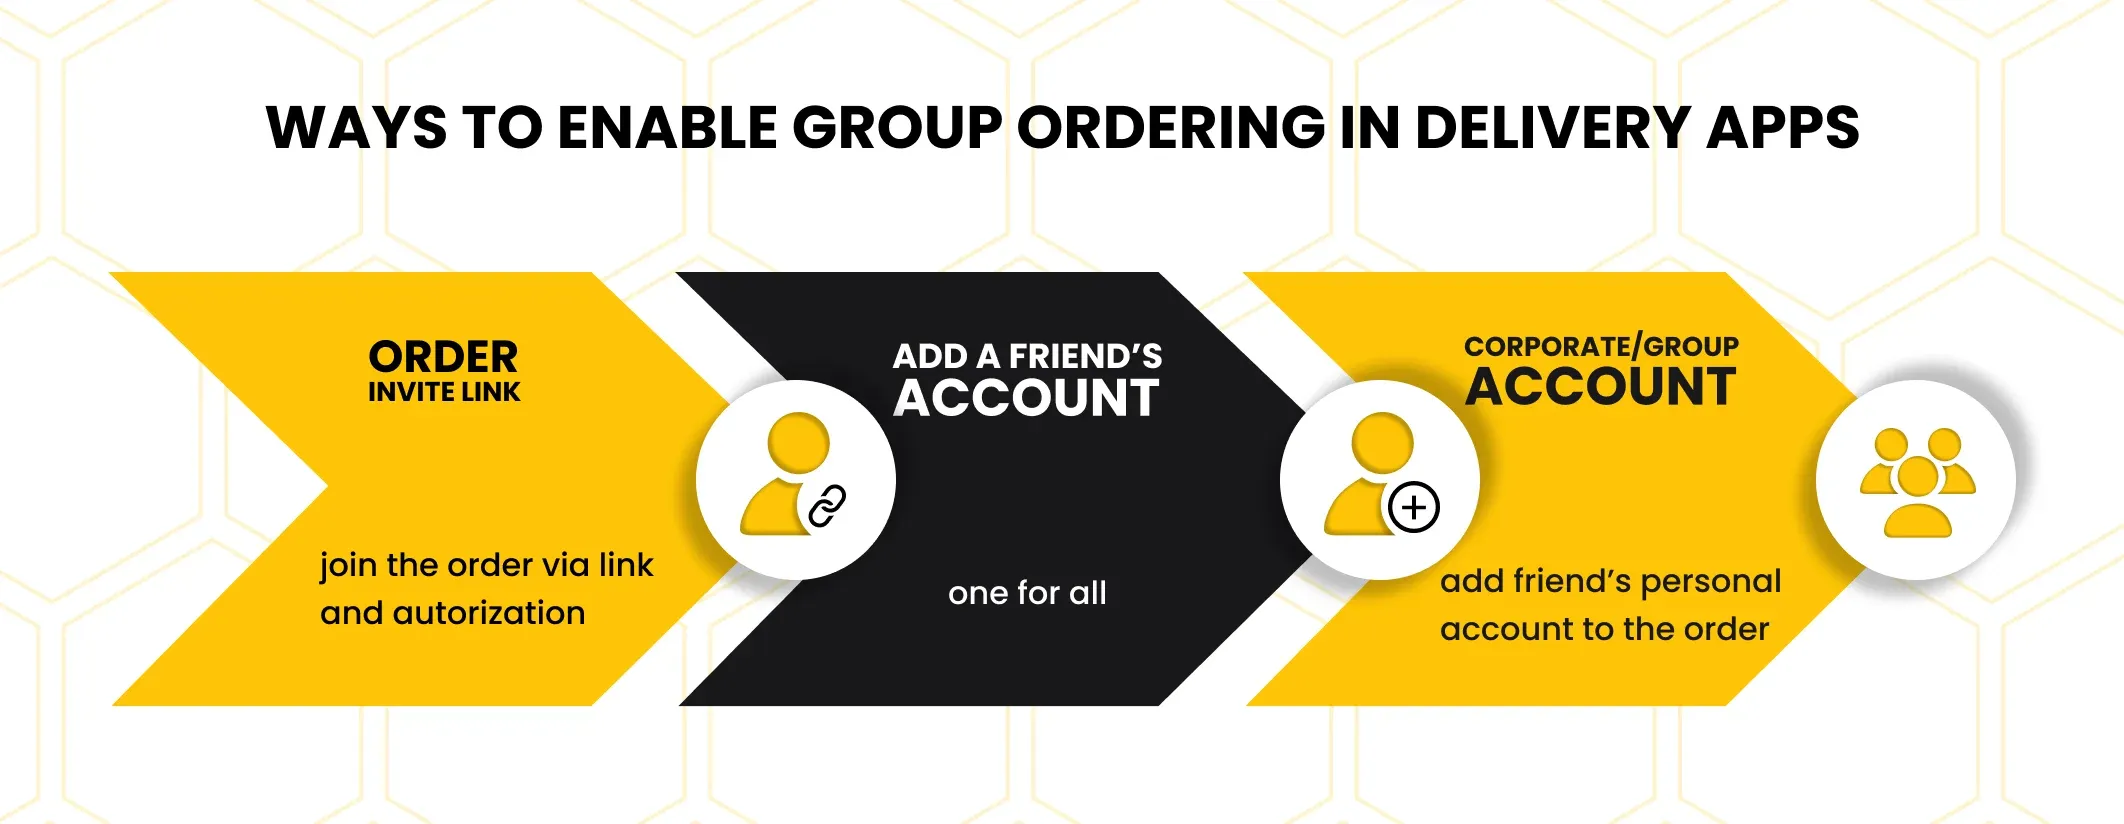 ways to enable group ordering